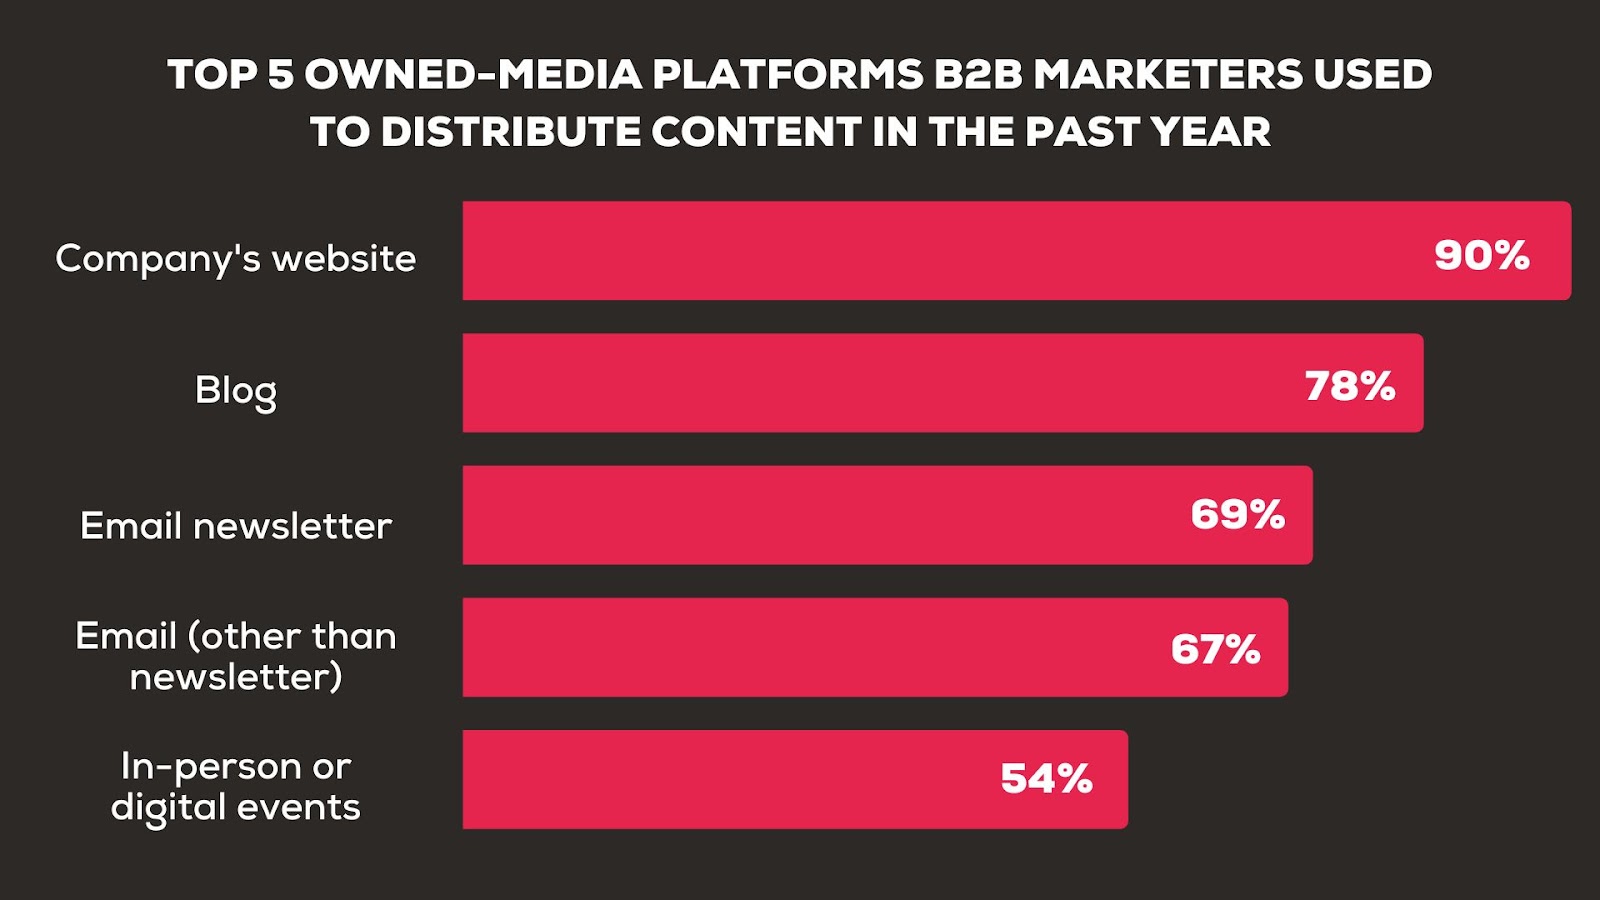 Top 5 owned-media platforms B2B marketers used to distribute content in the past year 